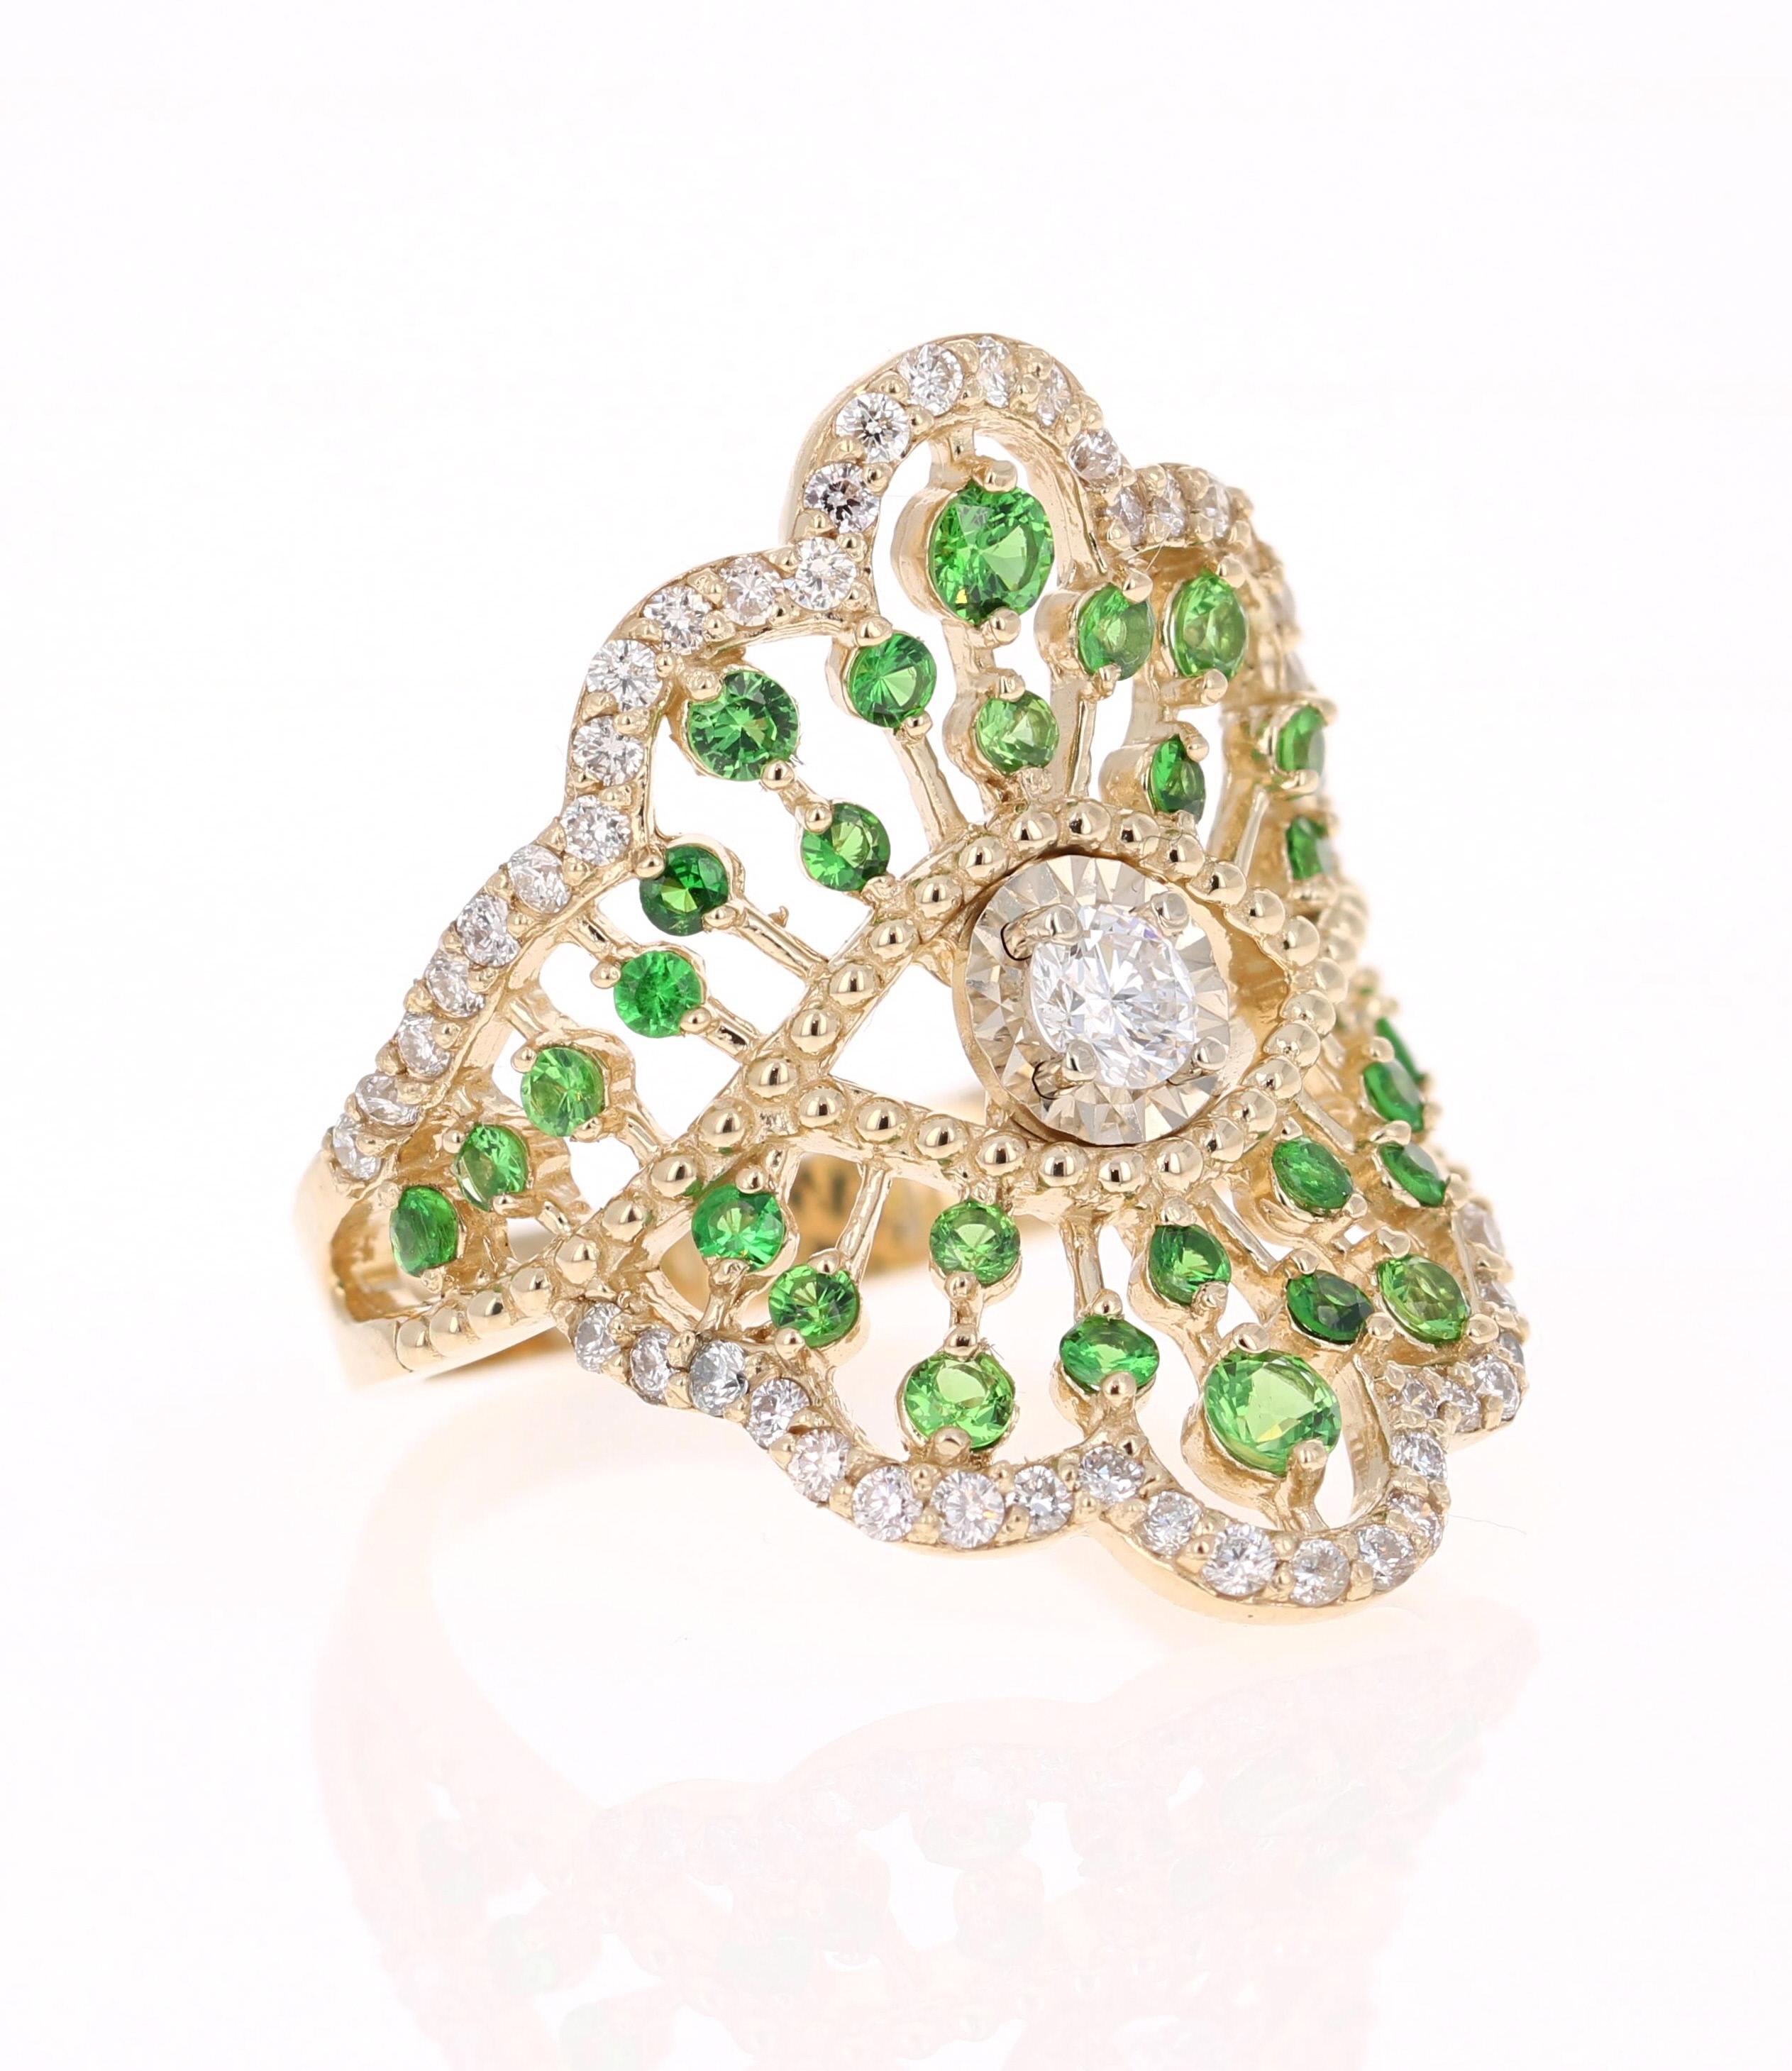 This unique cocktail ring has 30 Tsavorites that weigh 0.80 Carats and 55 Round Cut Diamonds that weigh 0.70 Carats. The total carat weight of the ring is 1.50 Carats. 

The ring is made in 14K Yellow Gold and weighs approximately 5.8 grams. 

 It